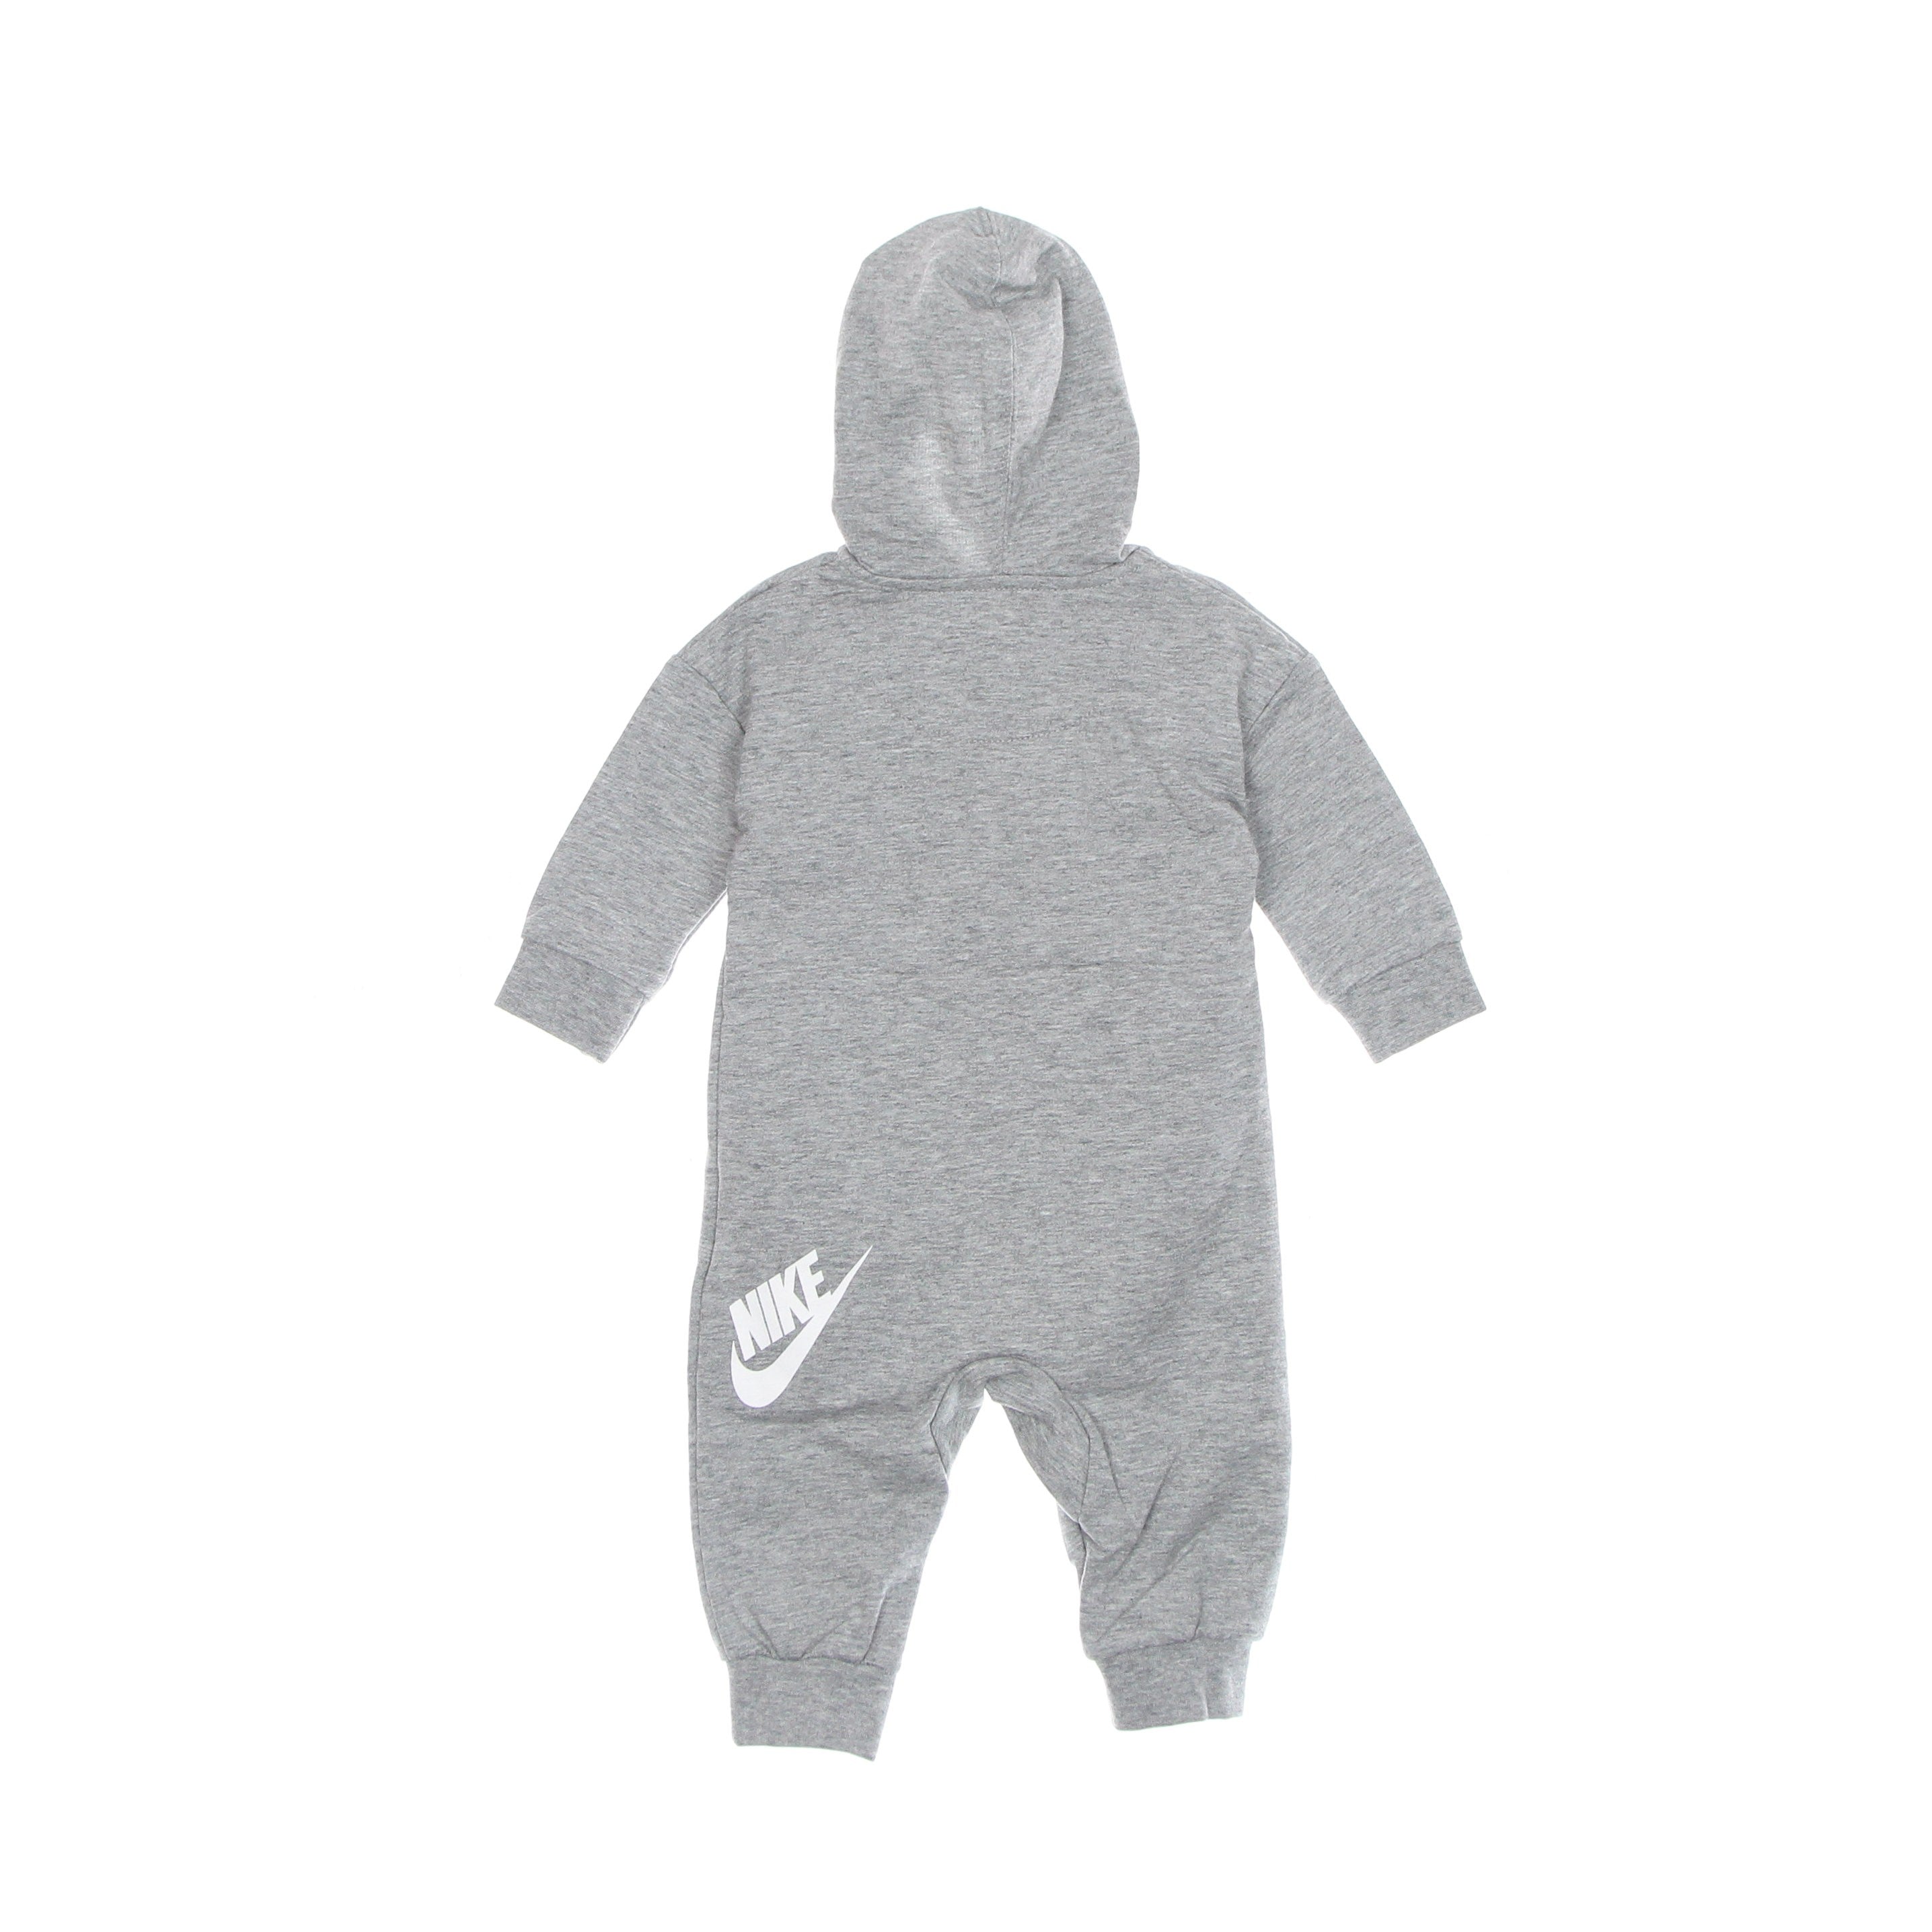 Newborn Baby French Terry All Day Tracksuit